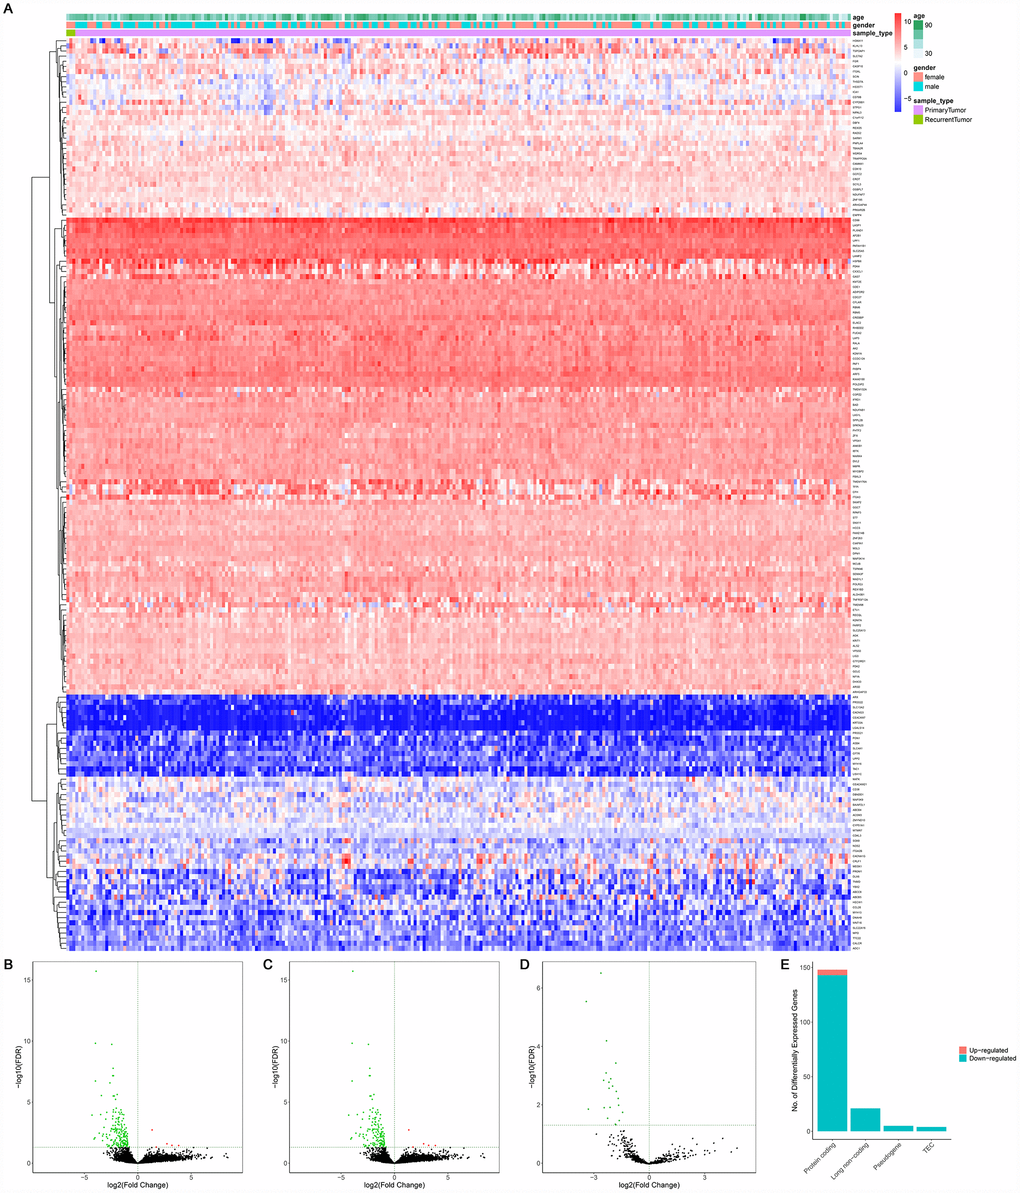 The differentially expressed genes between primary and recurrent STSs. (A) The heatmap and the volcano plot (B) of 178 differentially expressed genes between 259 primary and 3 recurrent STSs; (C) The volcano plot of 148 differentially expressed protein-coding genes between 259 primary and 3 recurrent STSs; The volcano Plot (D) of 21 differentially lncRNAs between 259 primary and 3 recurrent STSs; (E) The composition of differentially expressed genes. The log(fold-change) > 1.0 or 